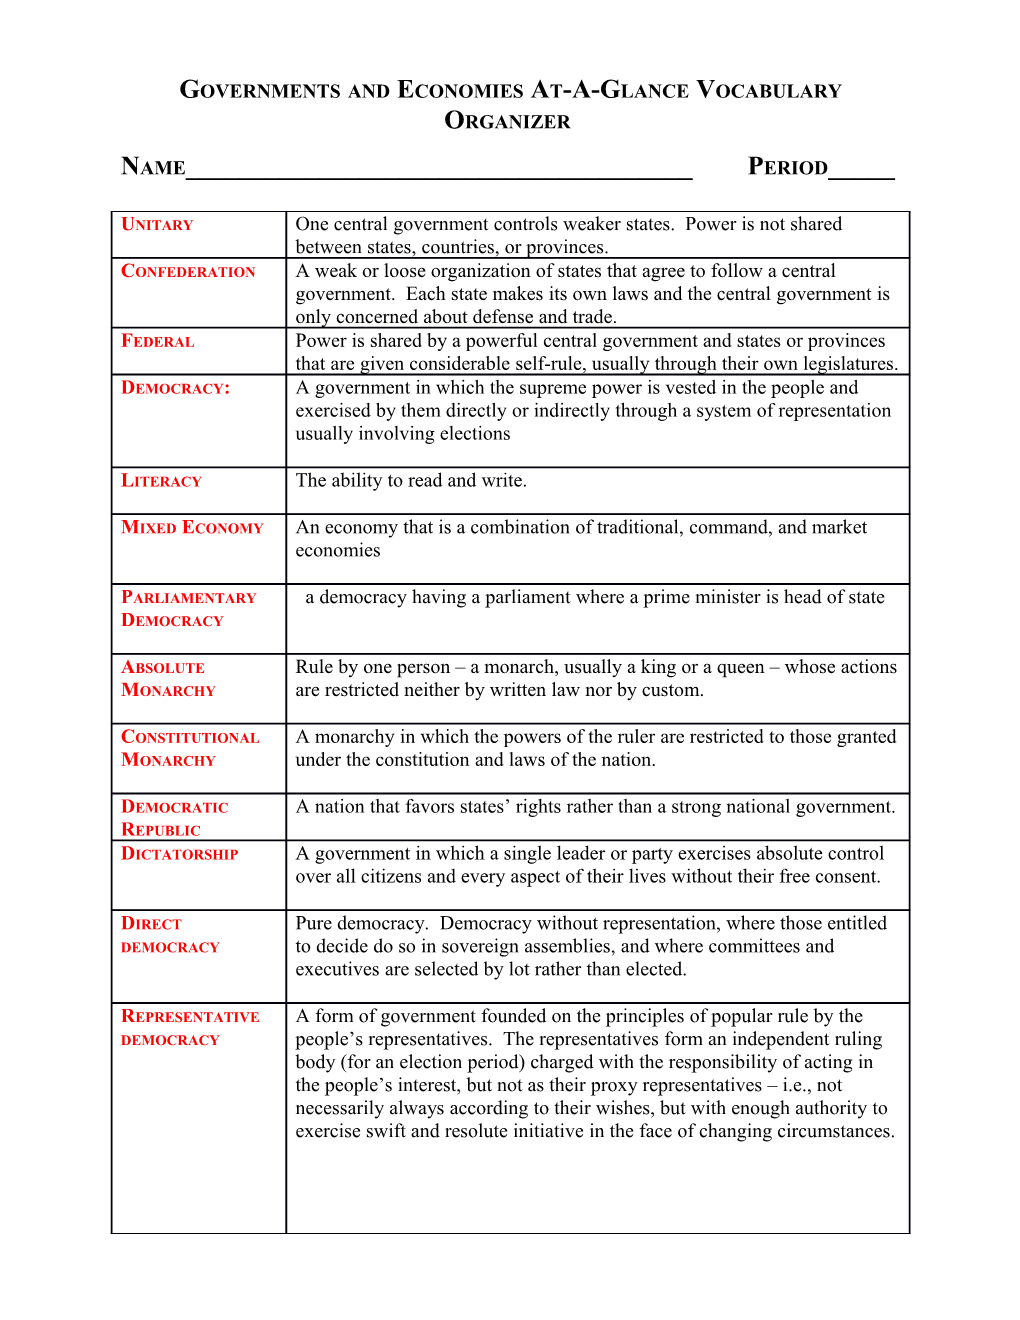 Governments and Economies At-A-Glance Vocabulary Organizer